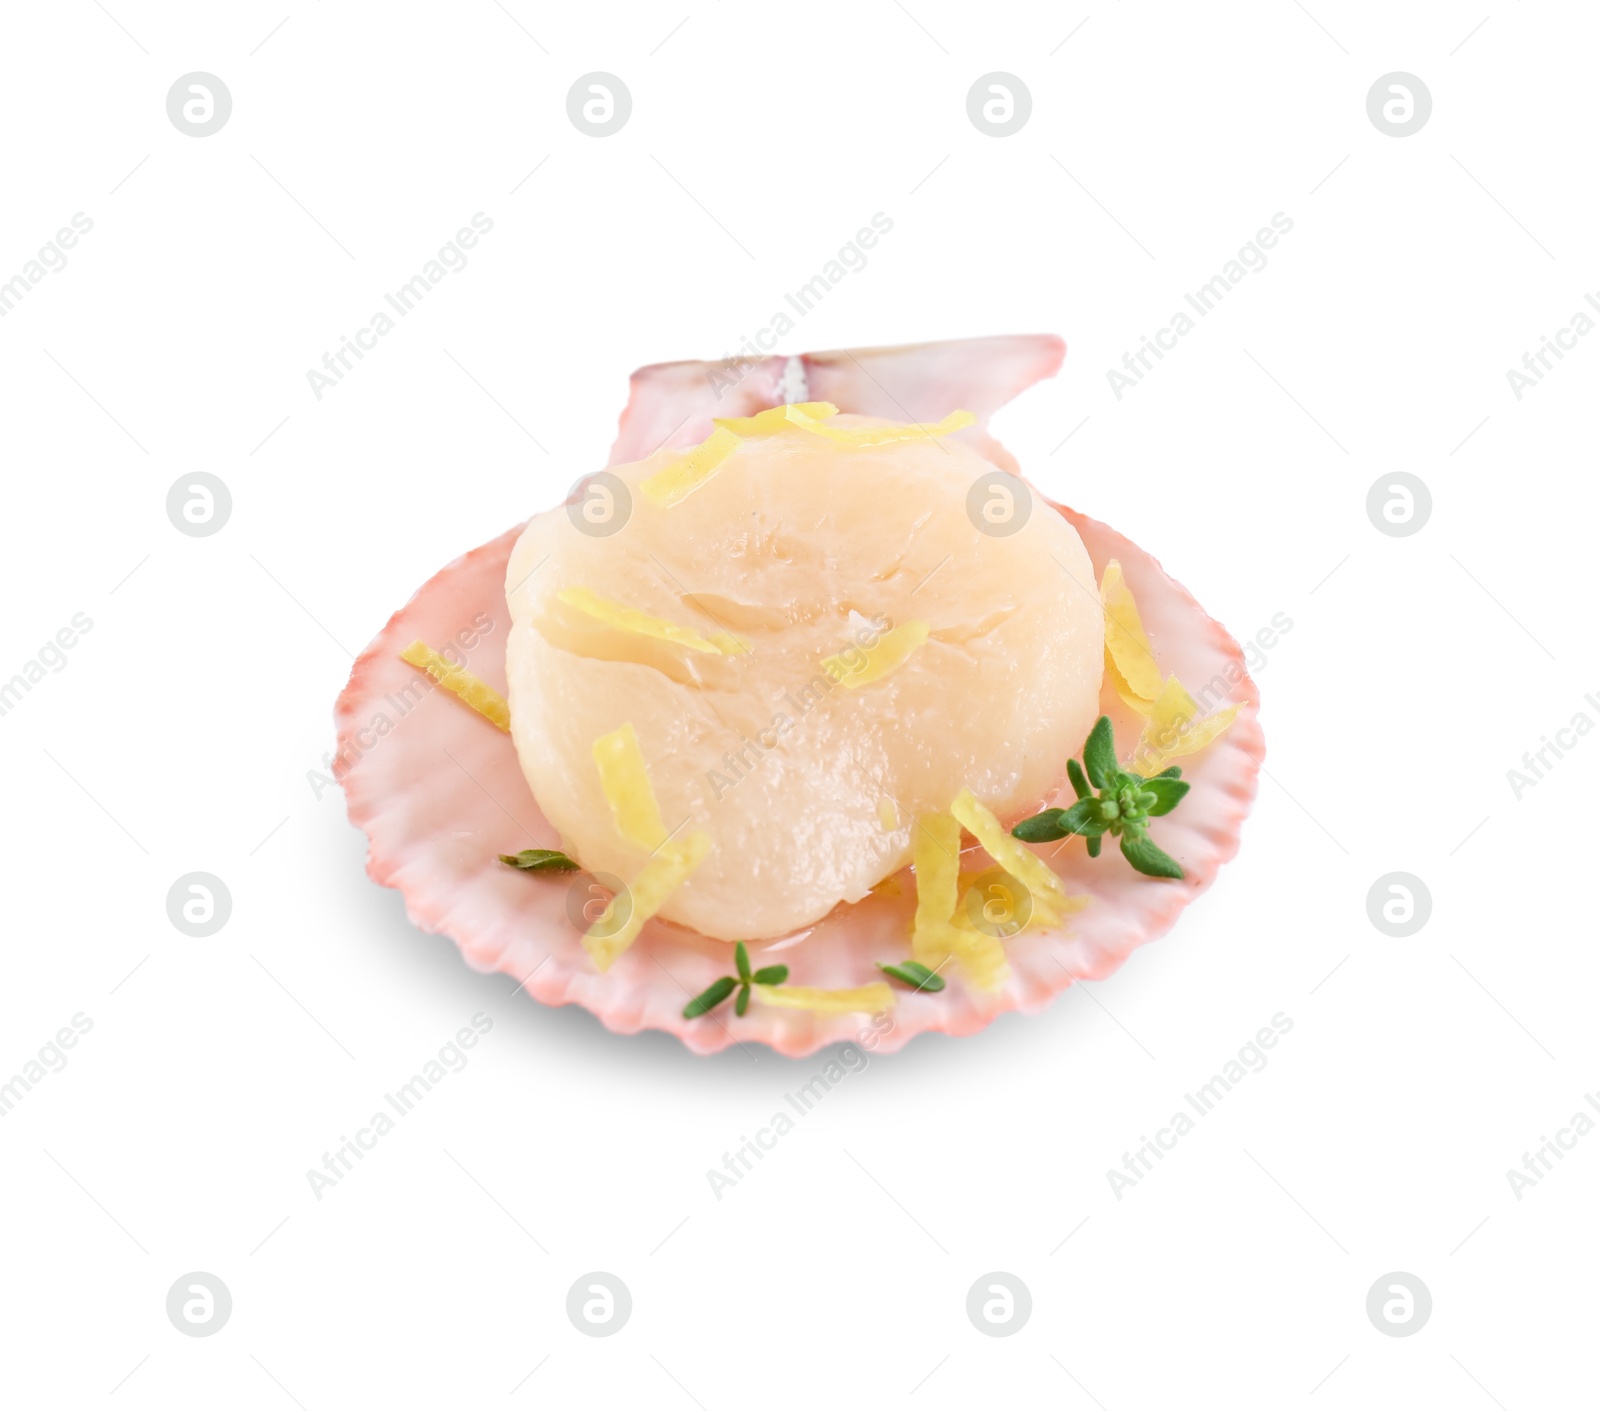 Photo of Raw scallop with lemon zest, thyme and shell isolated on white